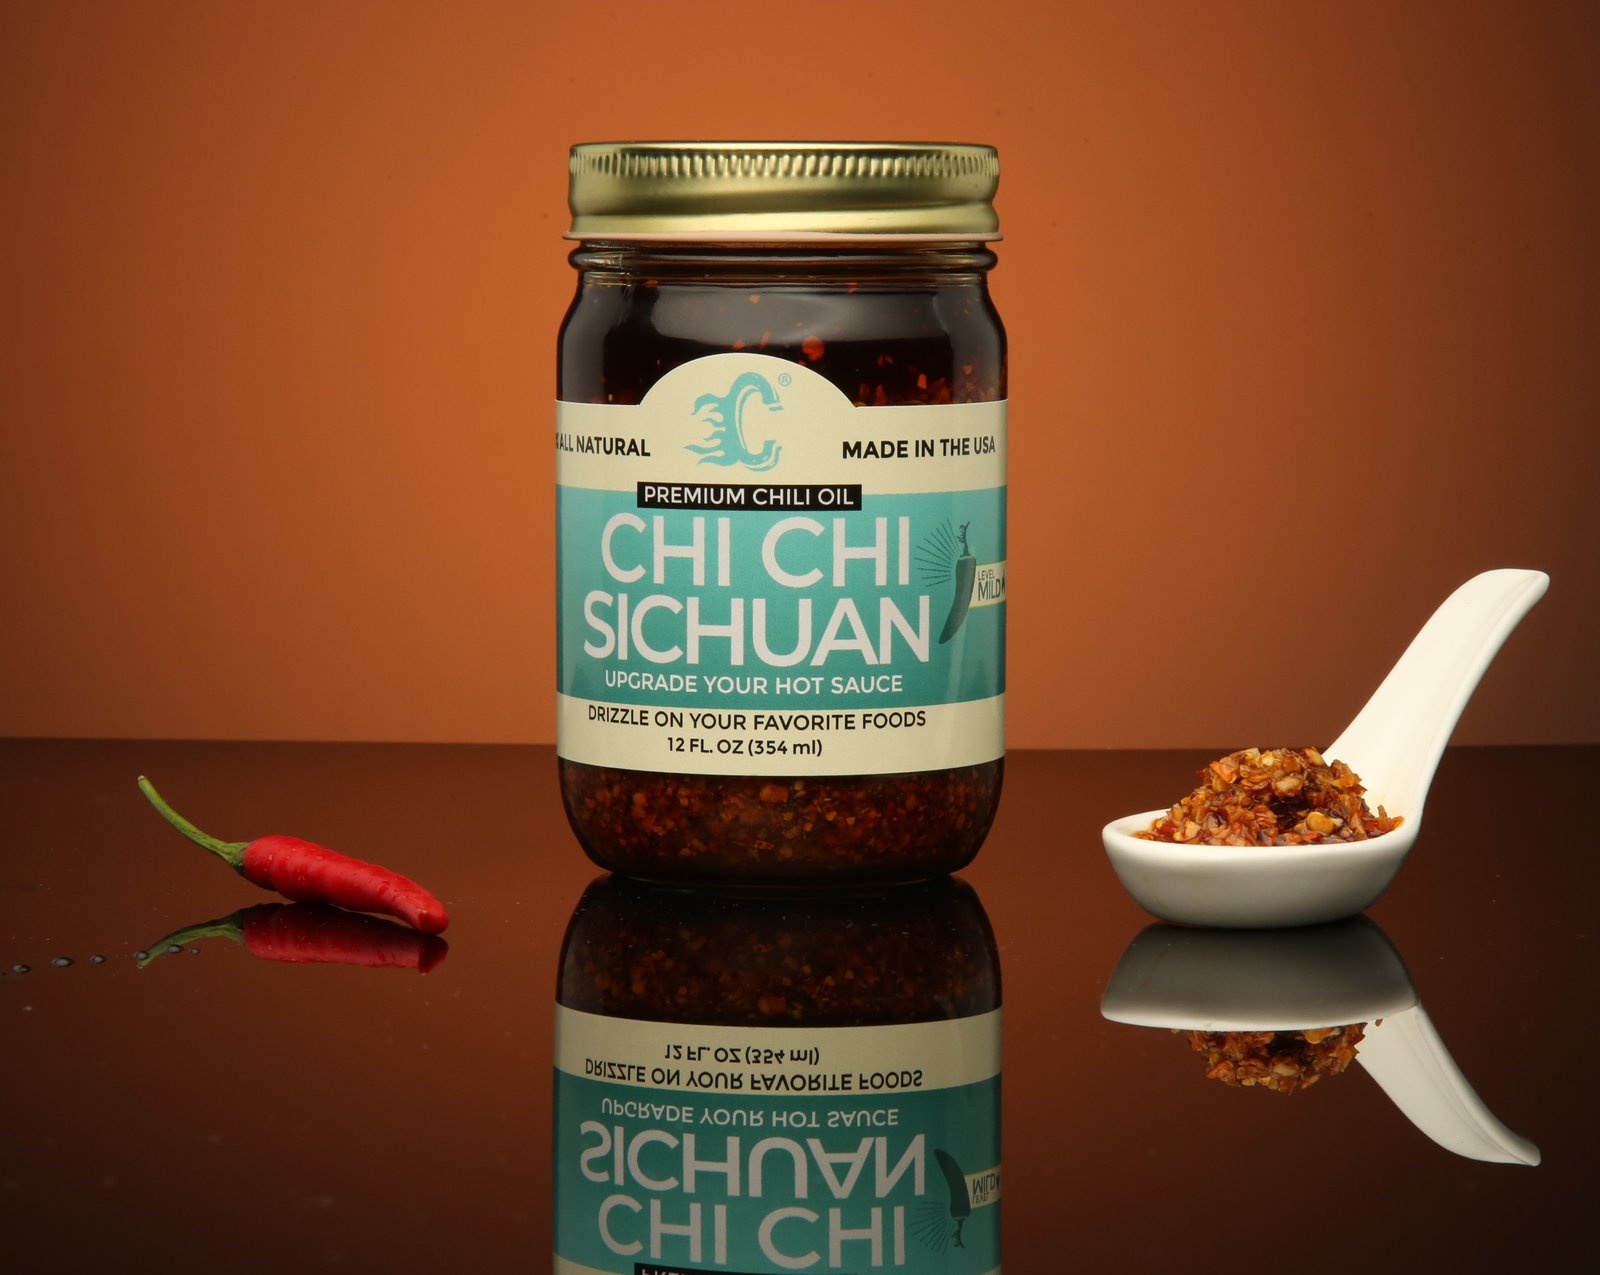 Introducing Chi Chi Sichuan! - Now Available